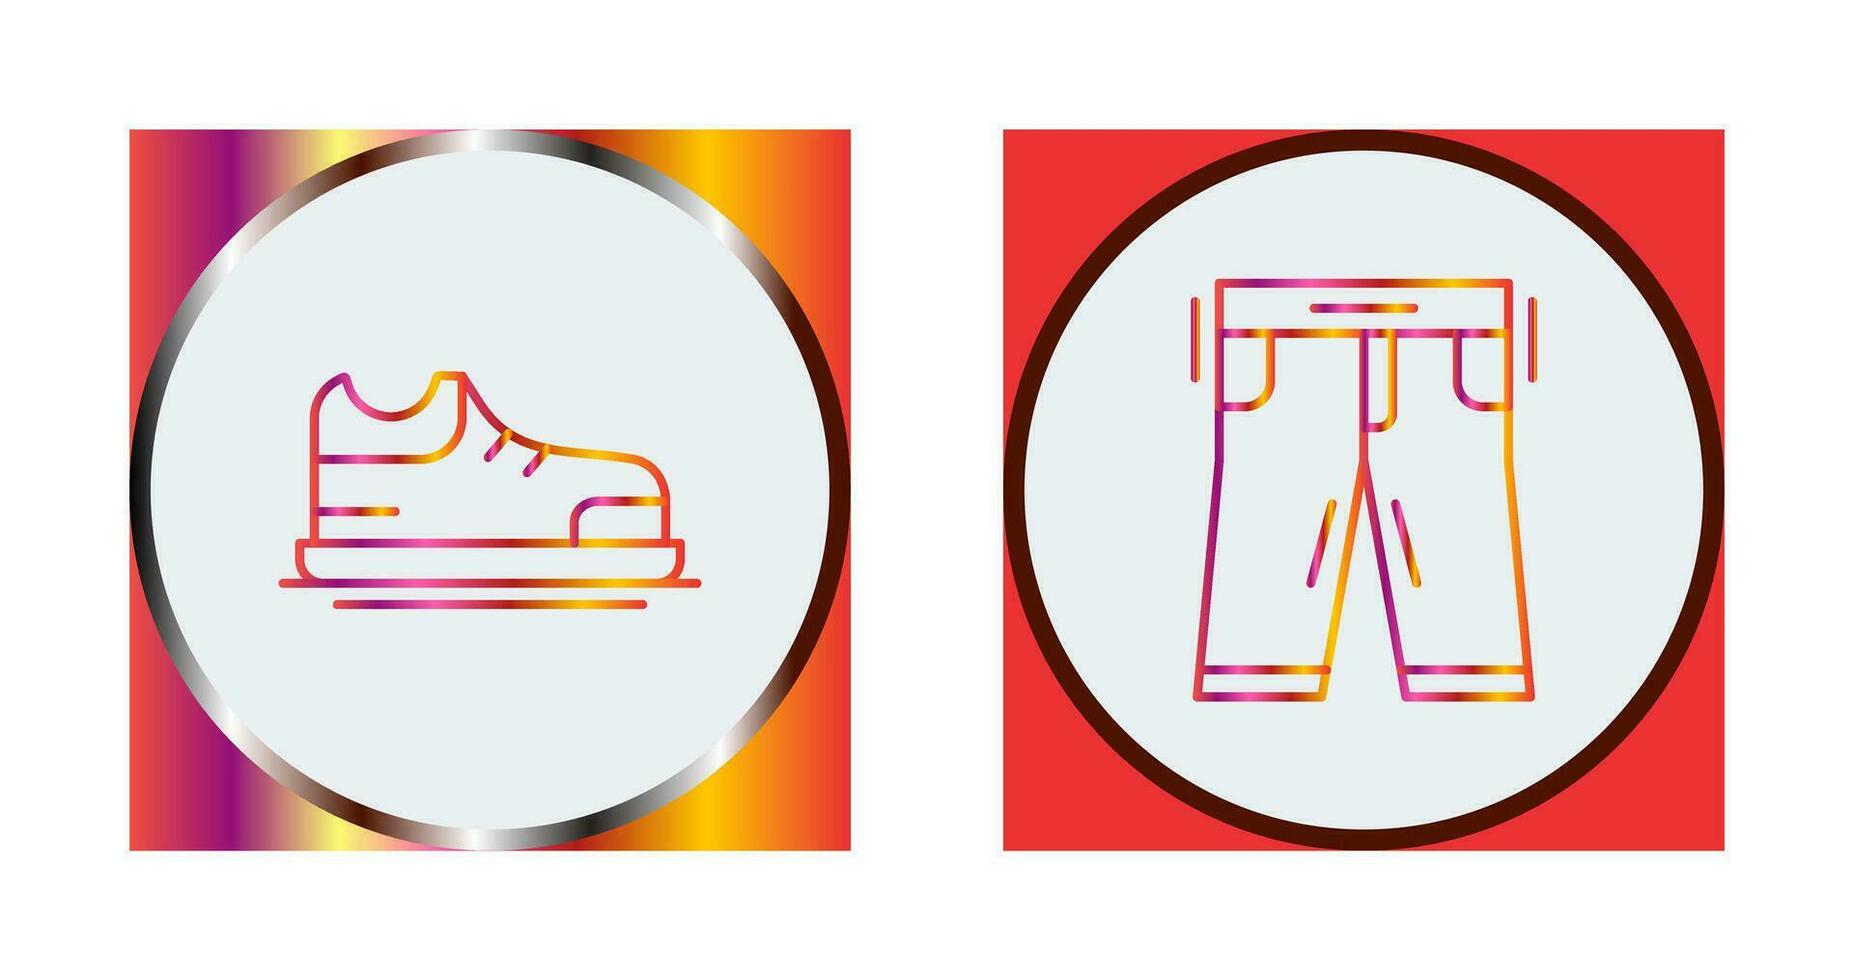 Shoes and Pants Icon vector